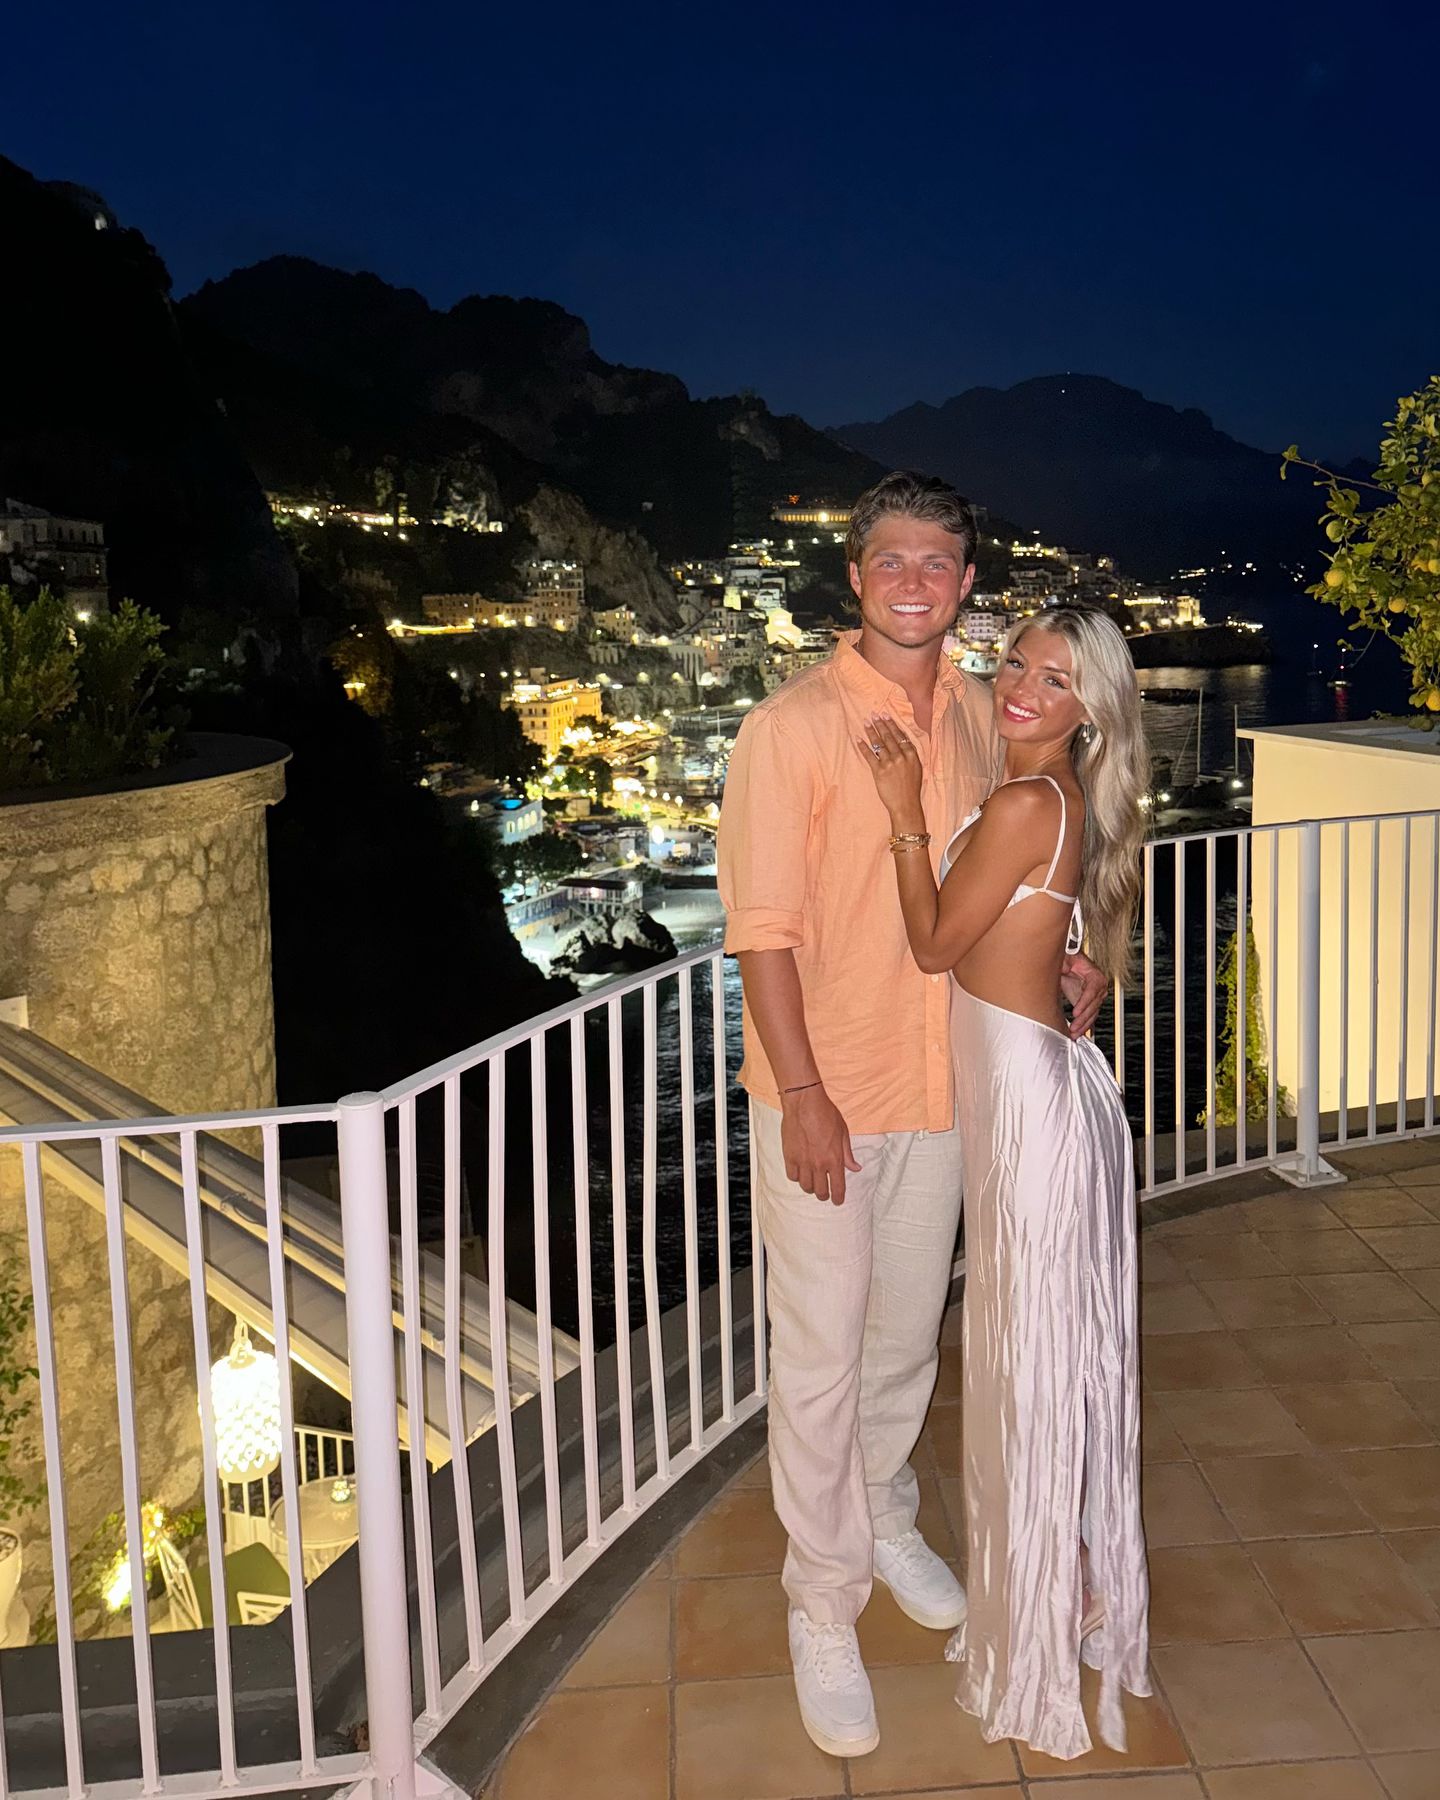 The loved-up couple are in picturesque Italy